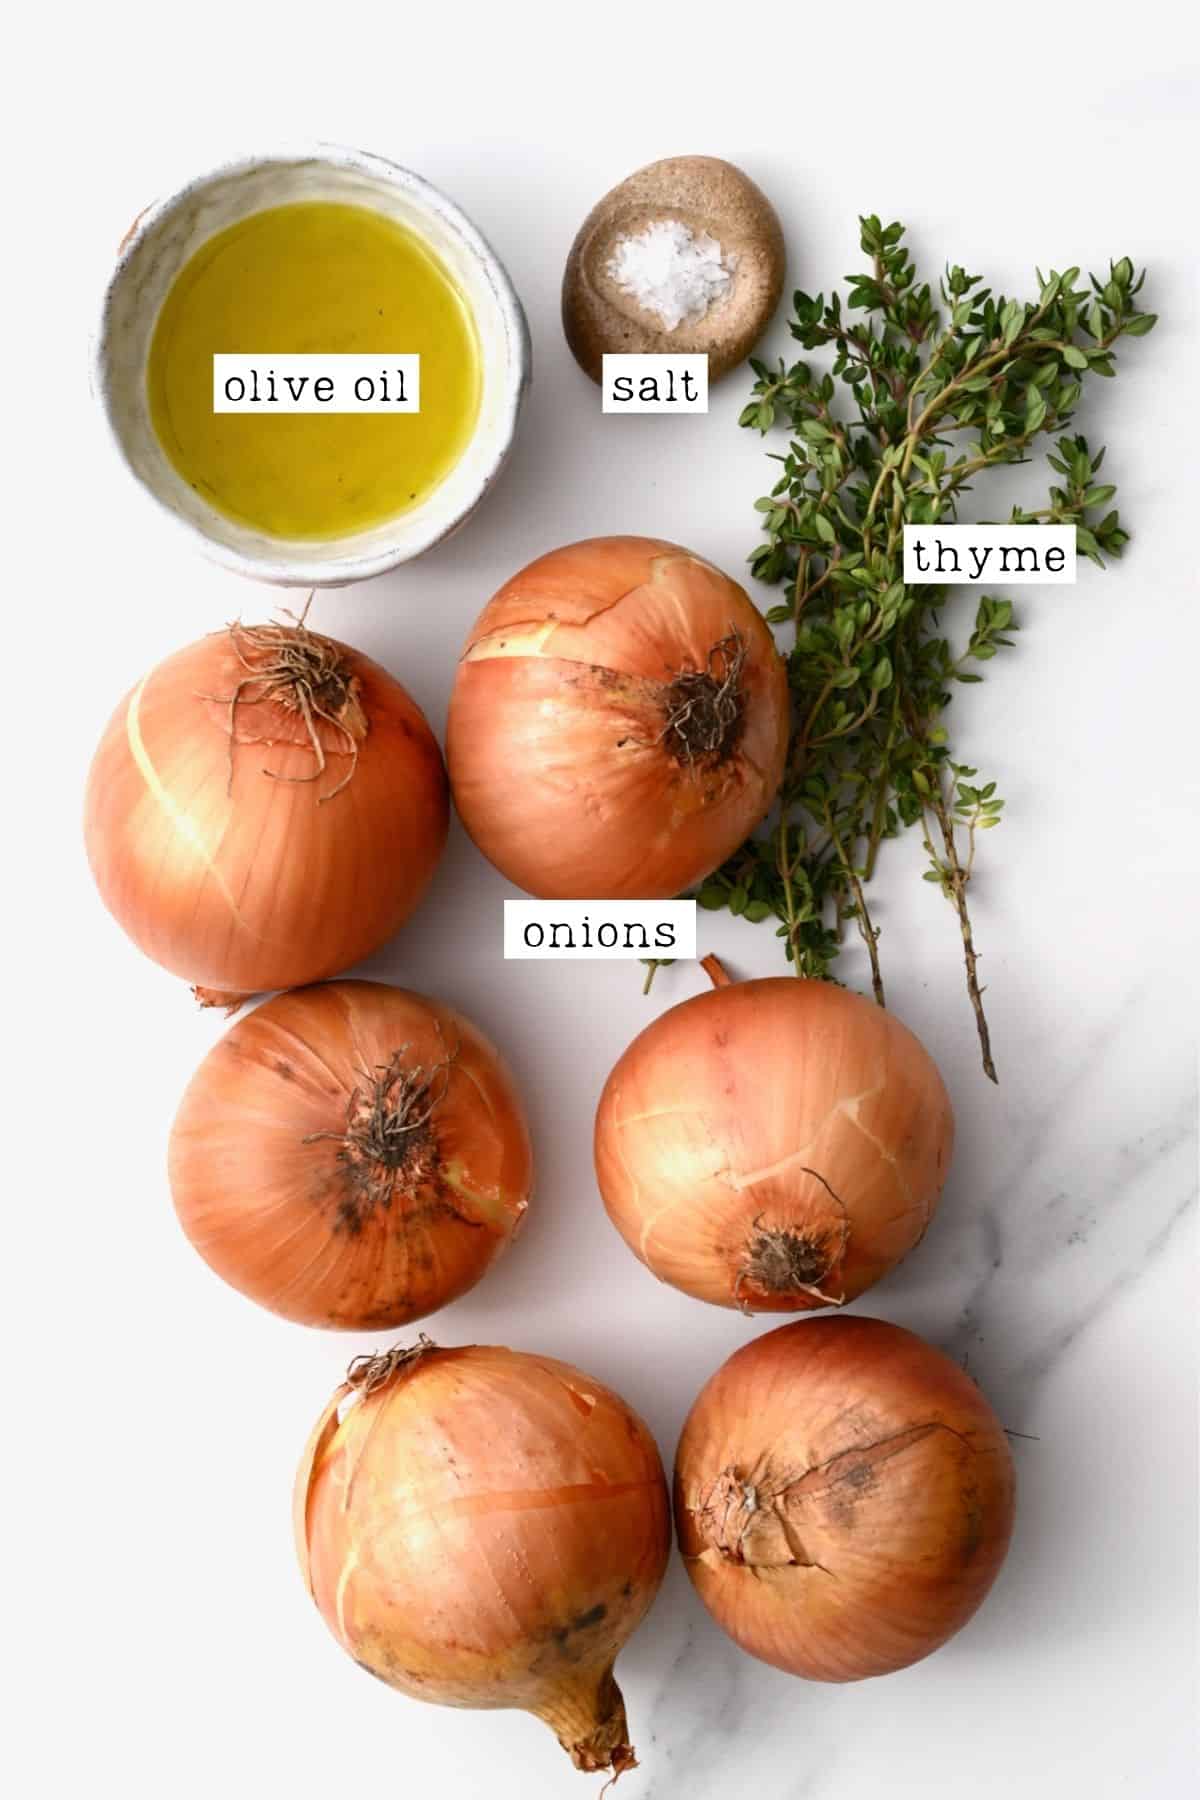 Ingredients for roasted onions